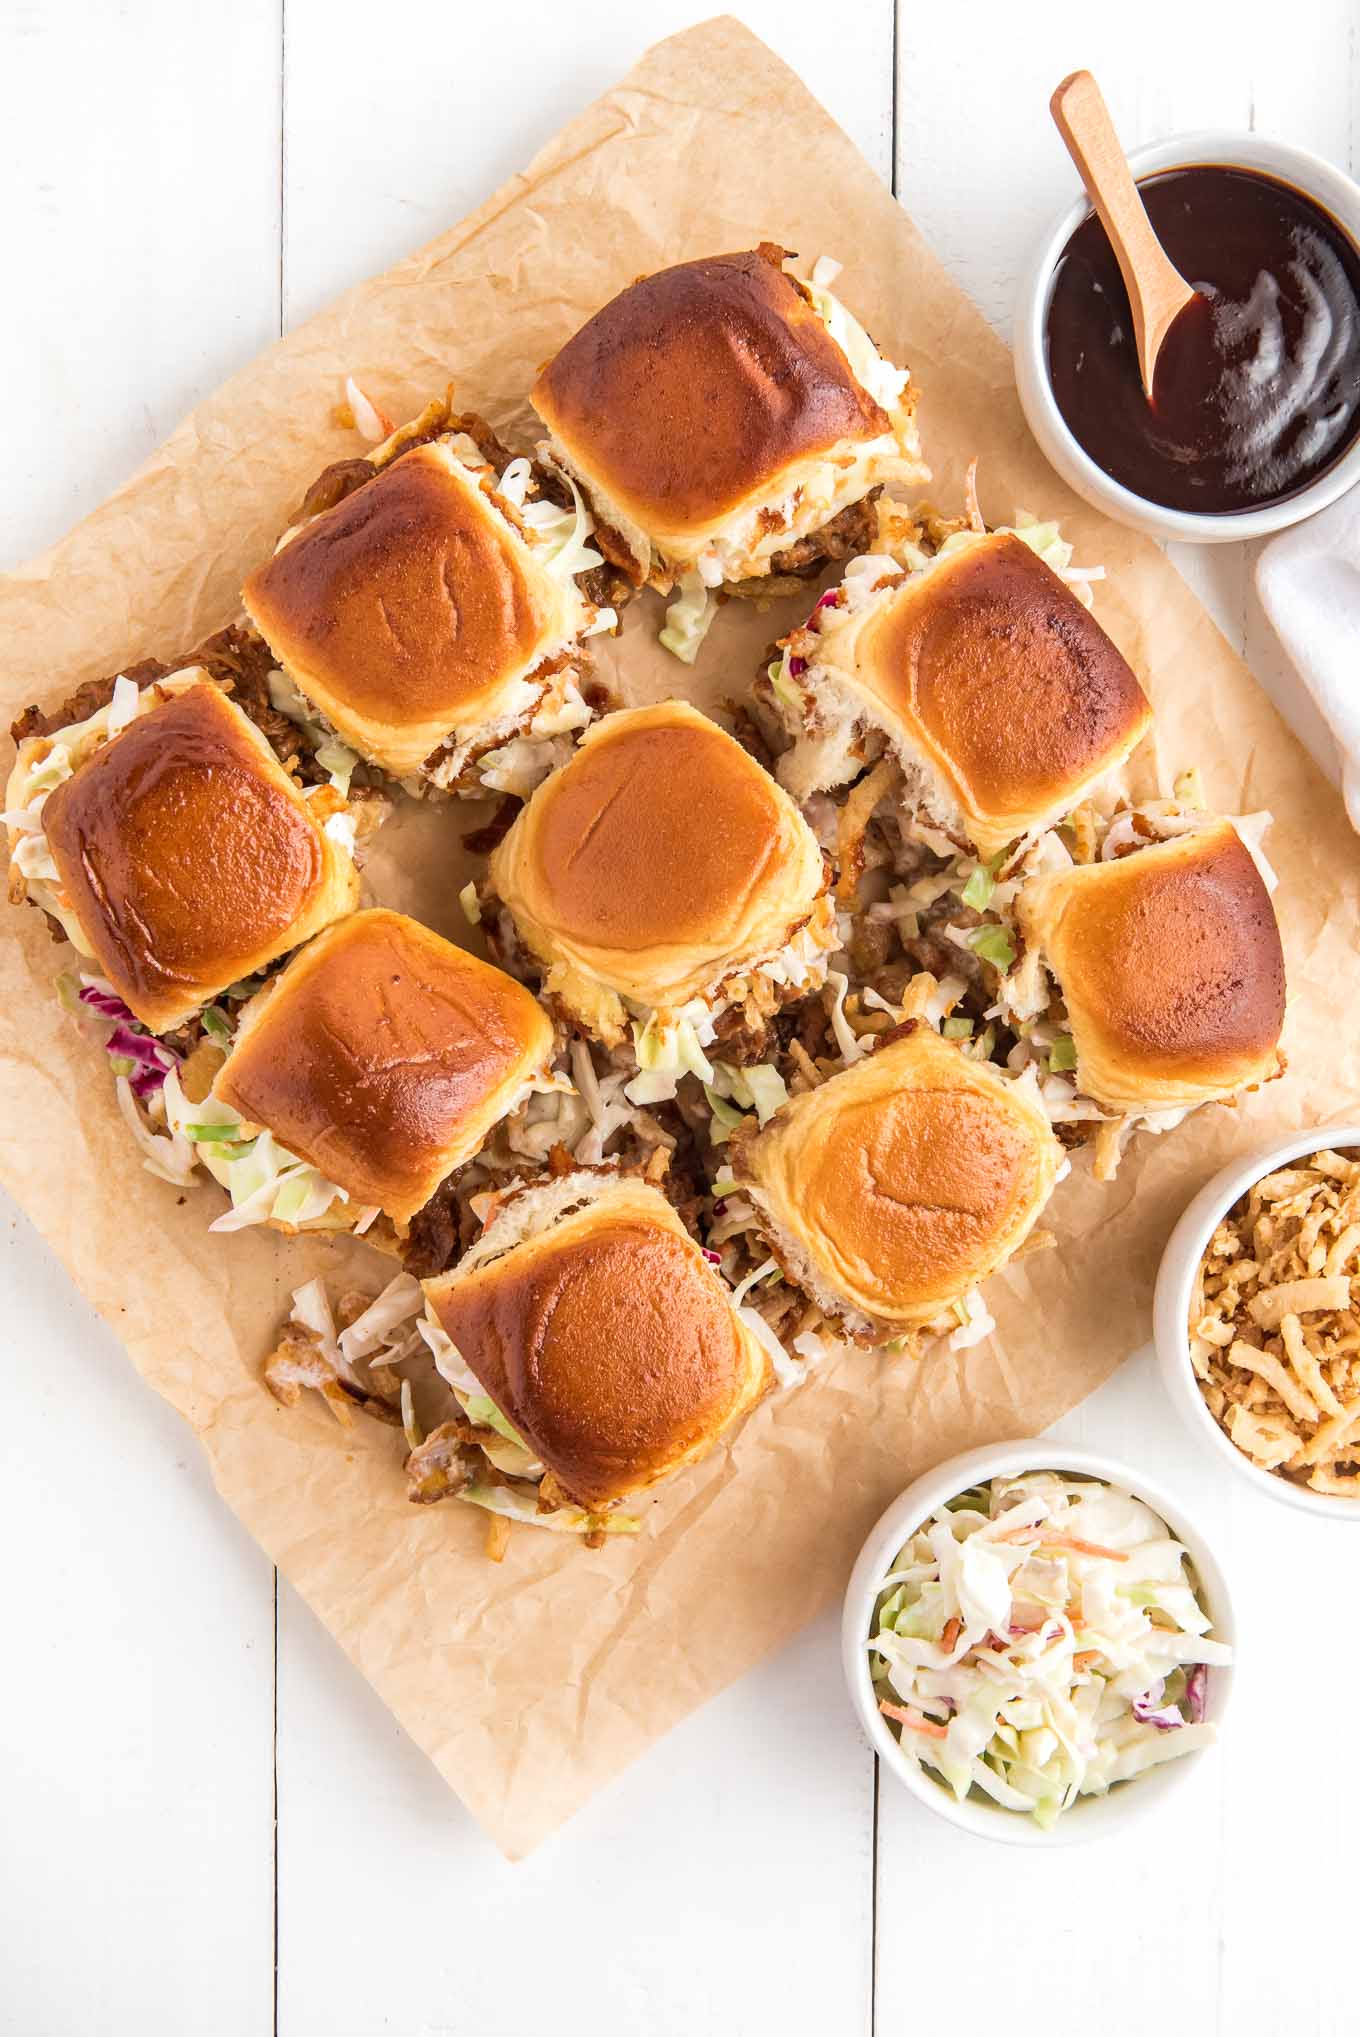 A bowl of BBQ sauce next to some pork sliders on a piece of parchment.